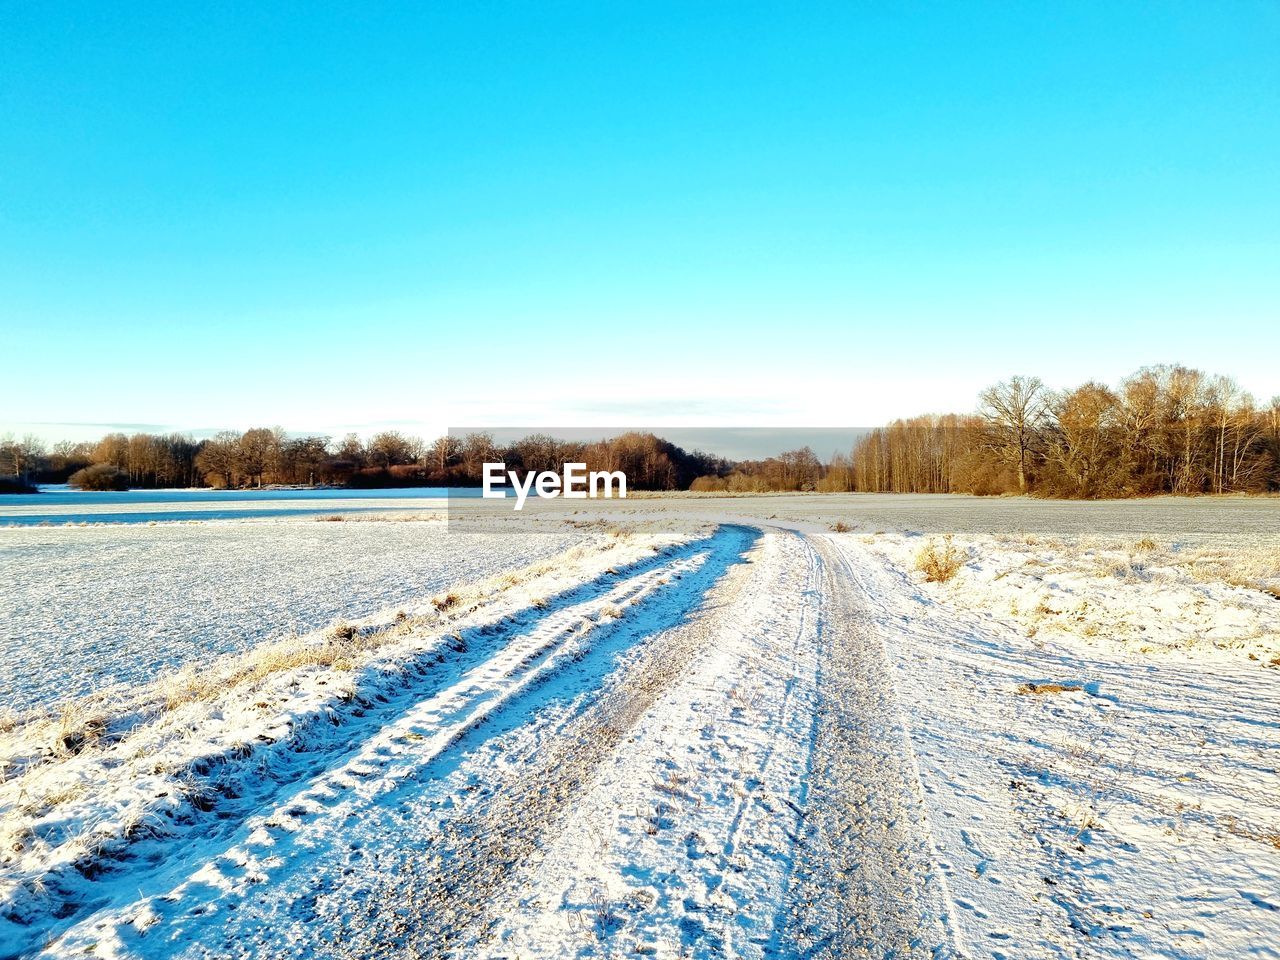 snow, winter, cold temperature, sky, landscape, environment, blue, nature, scenics - nature, tree, plant, tranquil scene, no people, clear sky, tranquility, land, frozen, beauty in nature, non-urban scene, day, white, rural scene, road, field, copy space, frost, transportation, outdoors, the way forward, tire track, remote, sunlight, ice